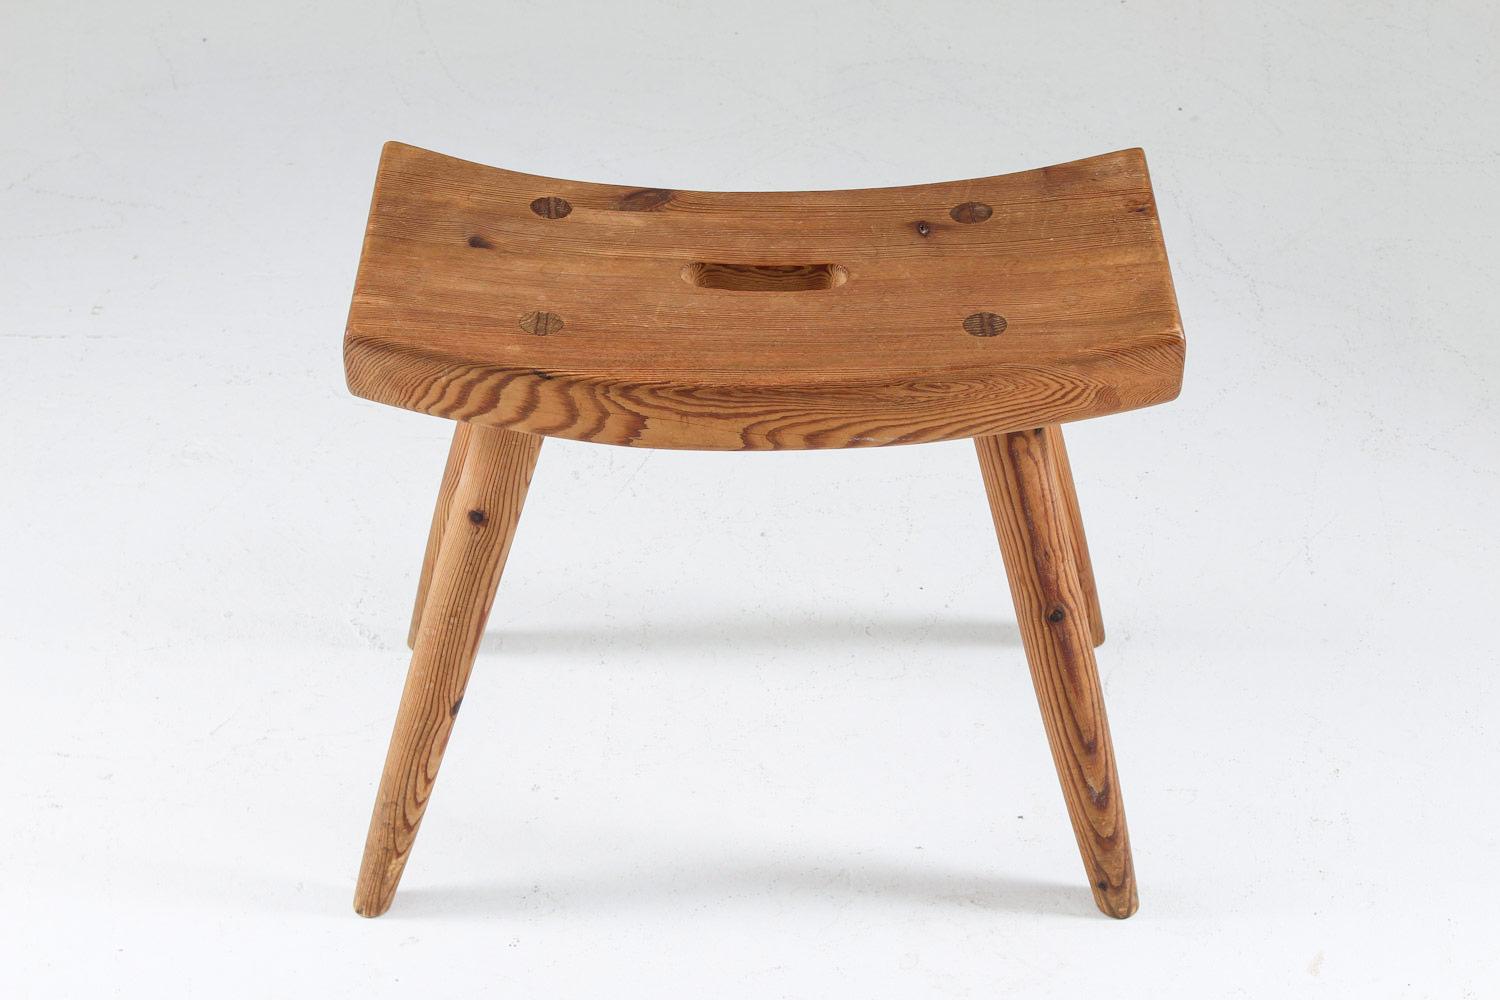 A stool in pine produced in Sweden, 1940s.
A great example of the sports cabin furniture that was produced in Sweden between 1930-1960. This anonymous stool is made of solid pine with beautiful shapes and details.
Condition: Very good original